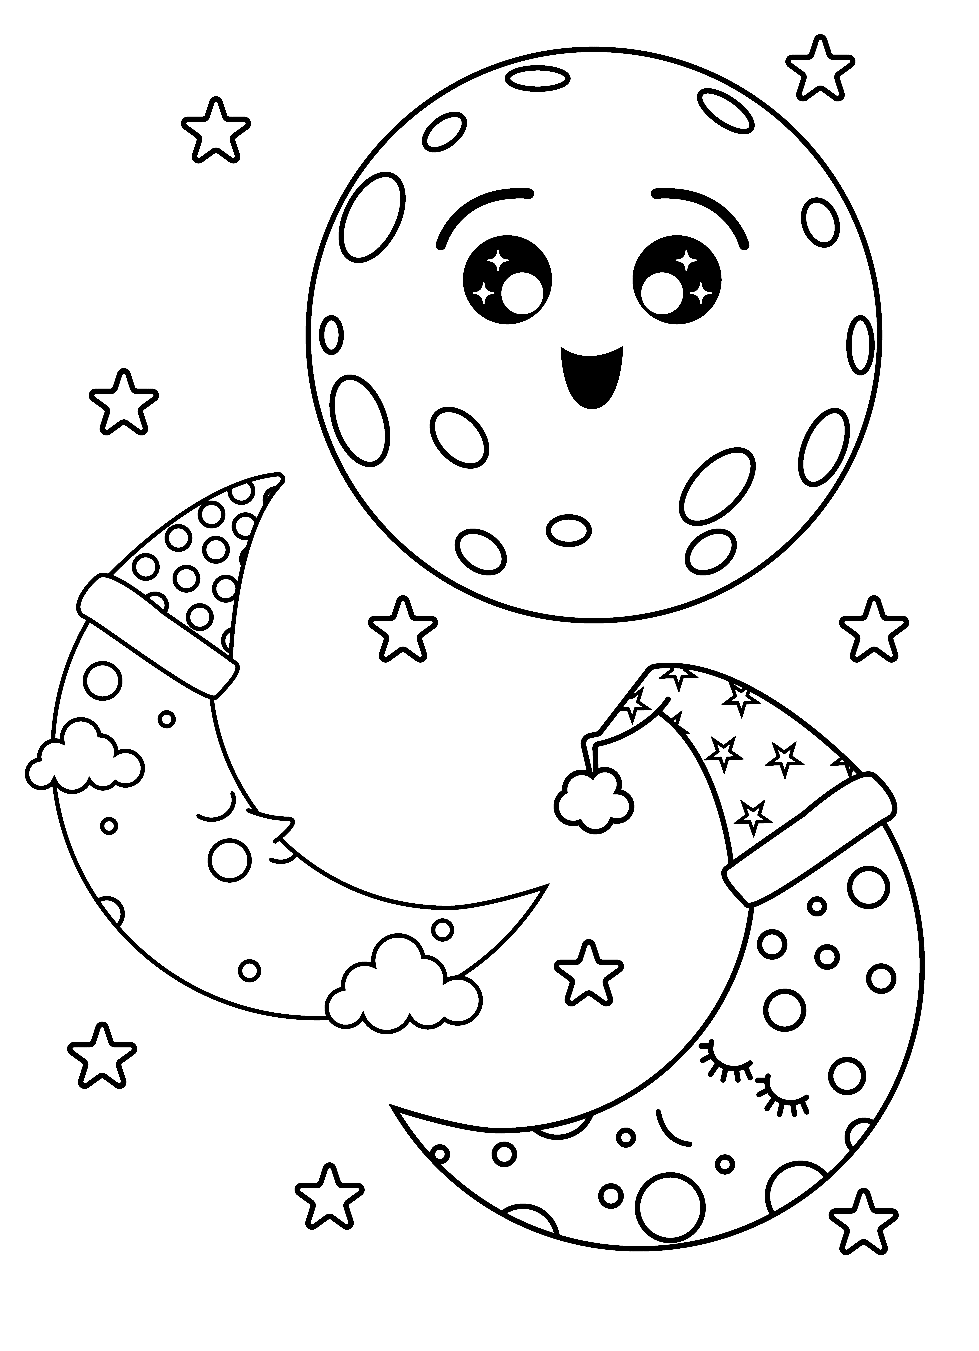 Sleeping Moons Coloring Page